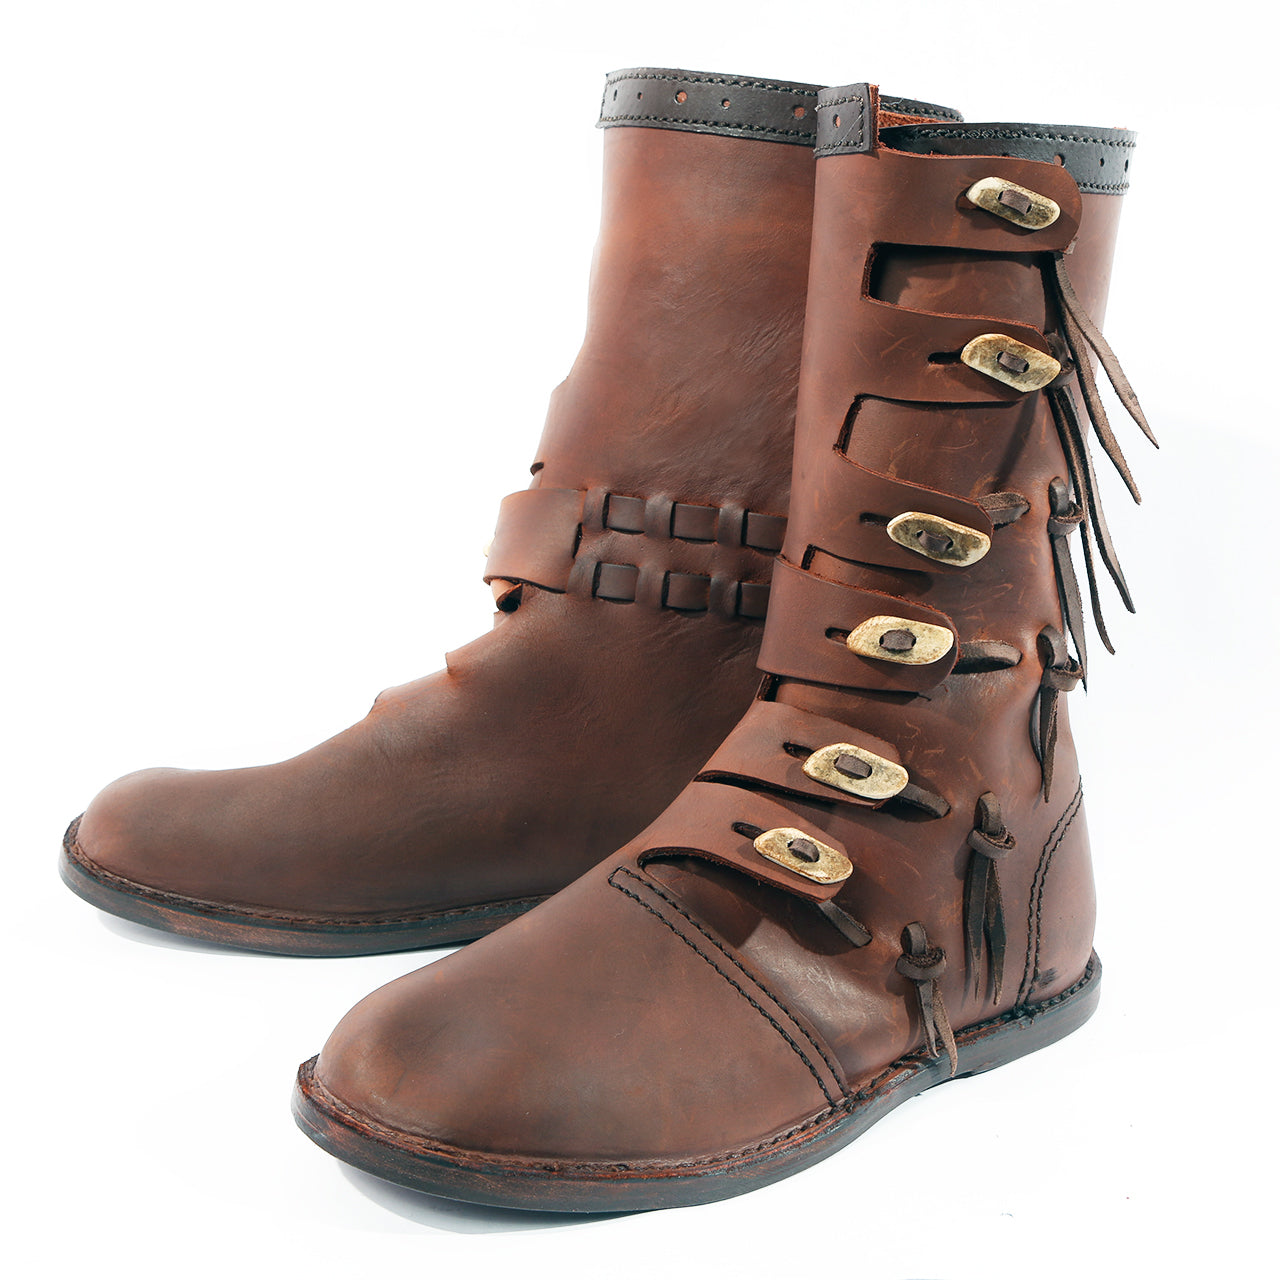 Boots - Viking Boots, Hedeby - Grimfrost.com